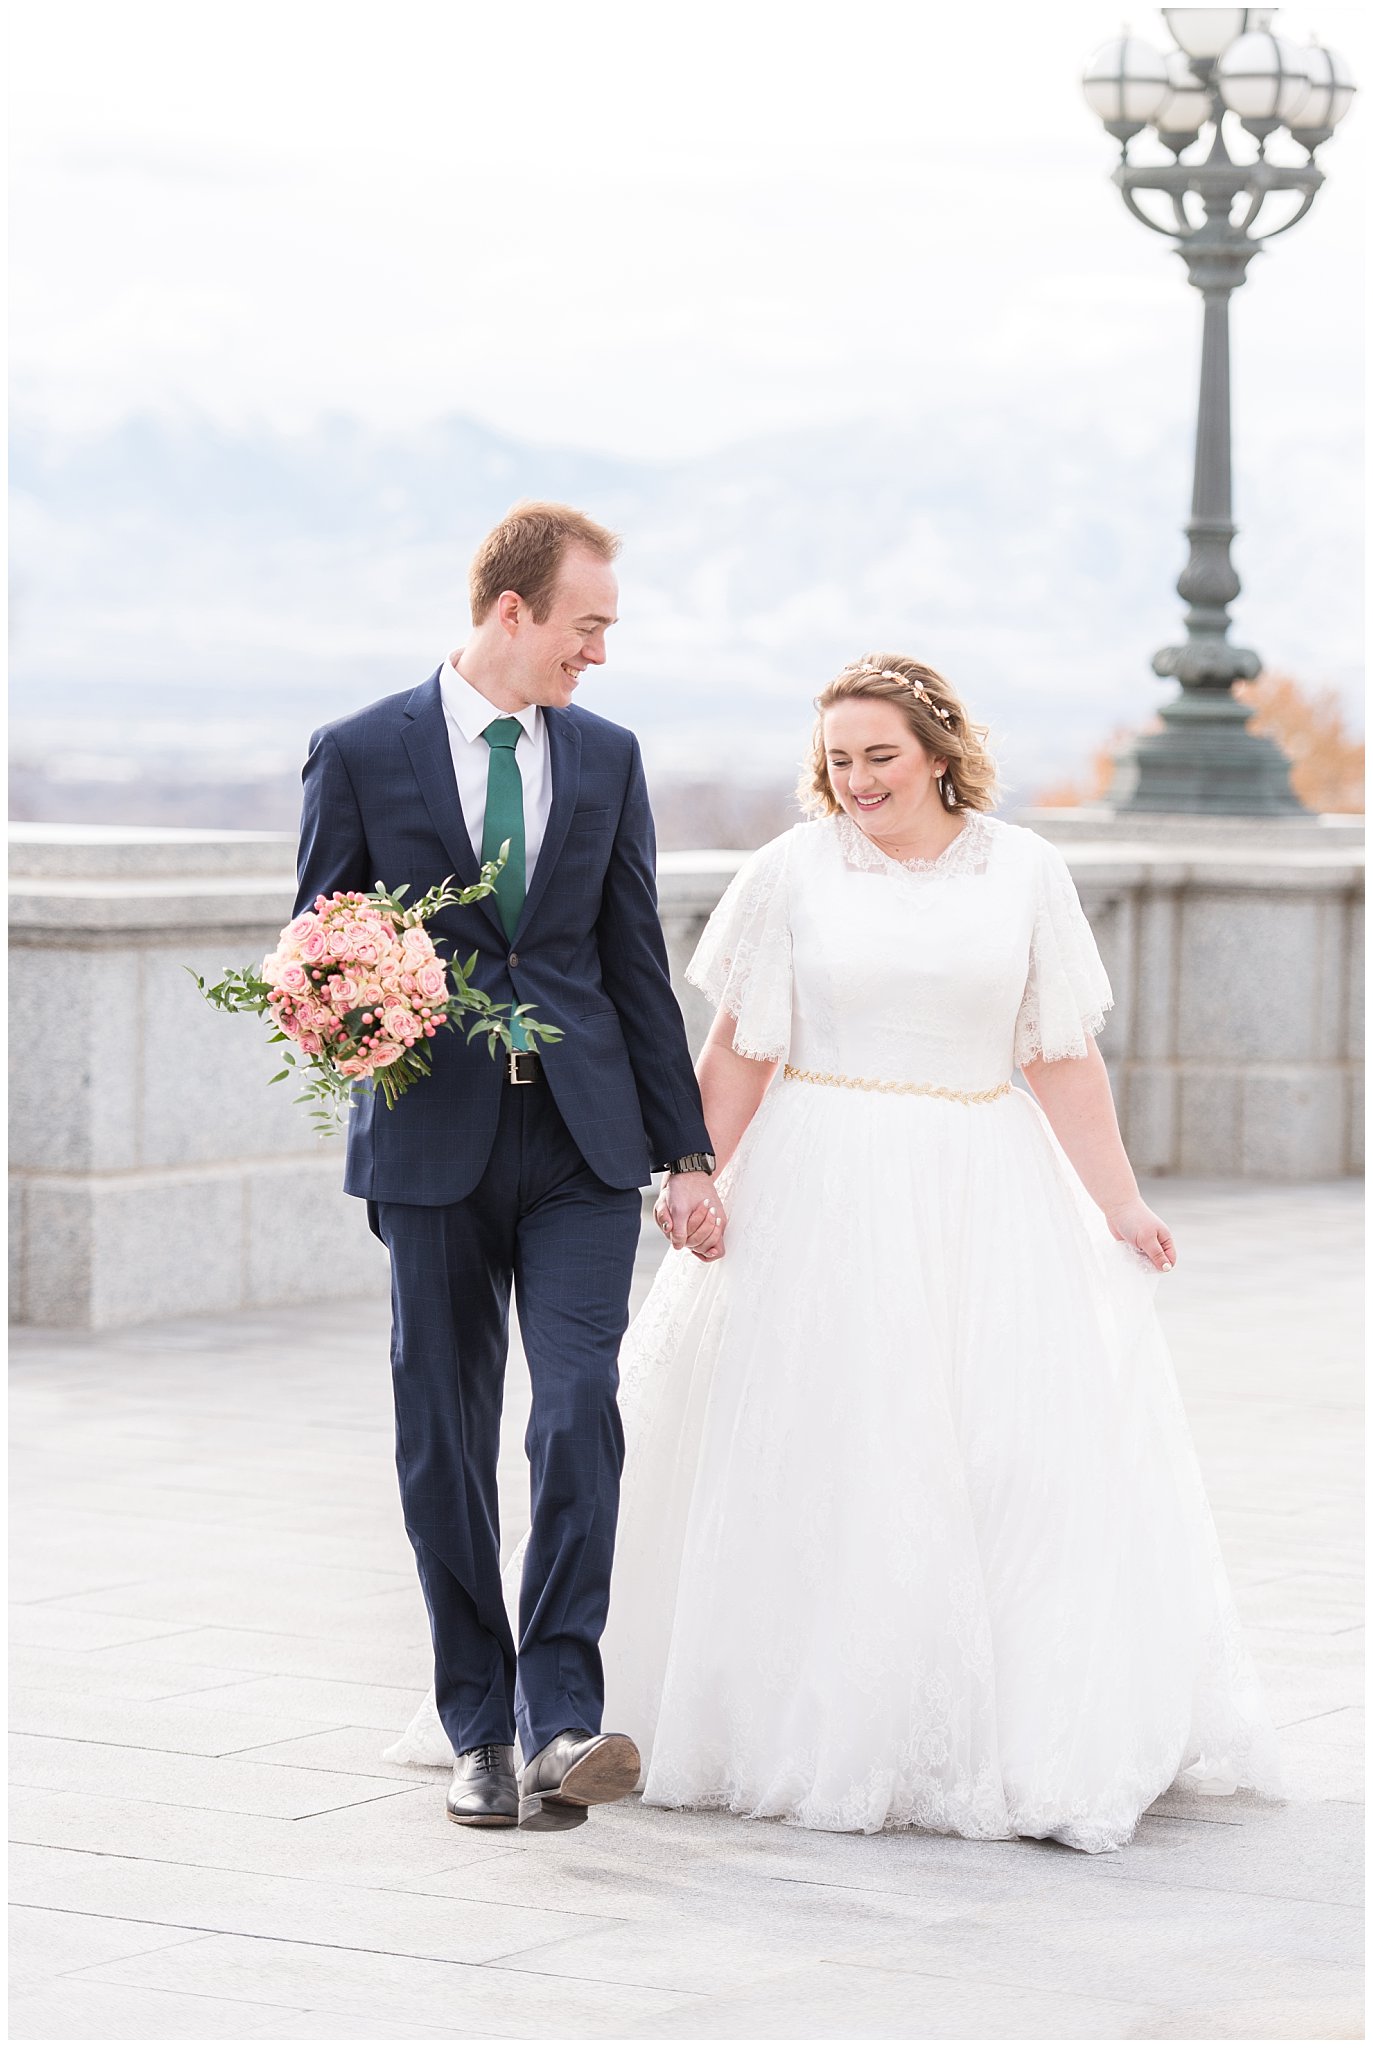 Bride and groom laugh and walk while groom holds bouquet | Winter Formals at the Utah State Capitol | Utah Wedding Photography